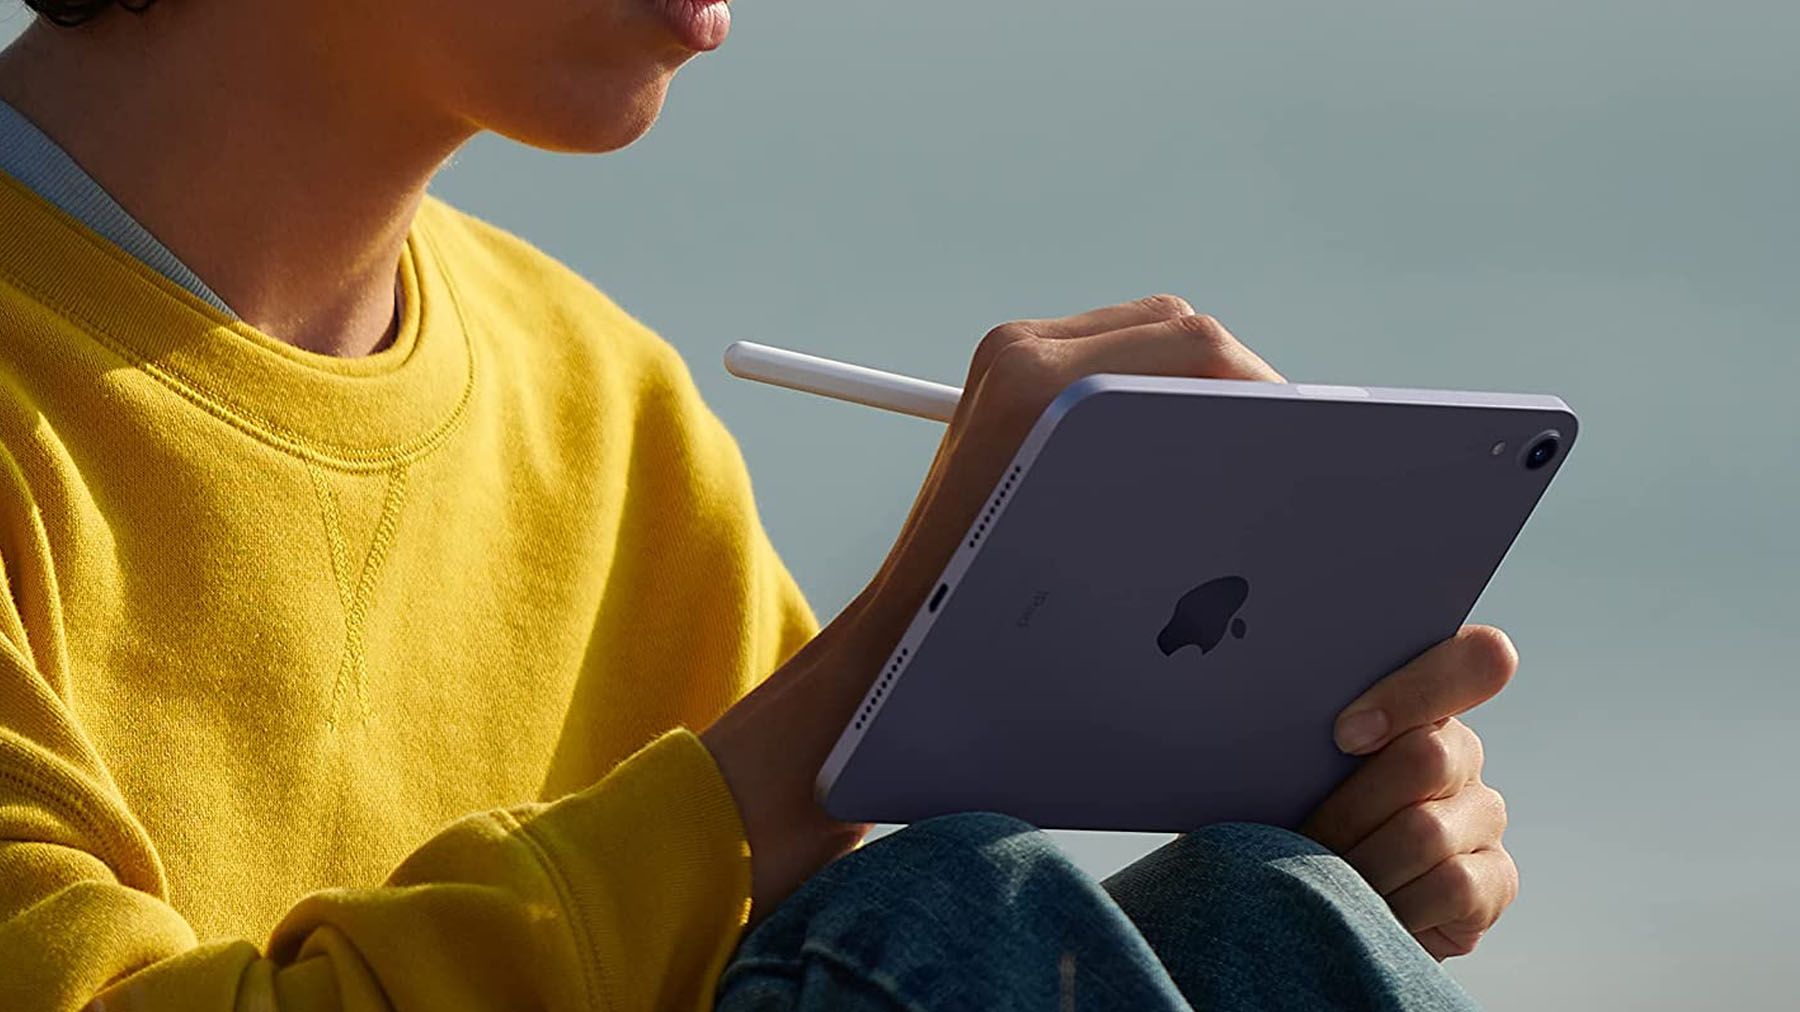 A shot of a person sat on an iPad Mini whilst using an Apple Pencil